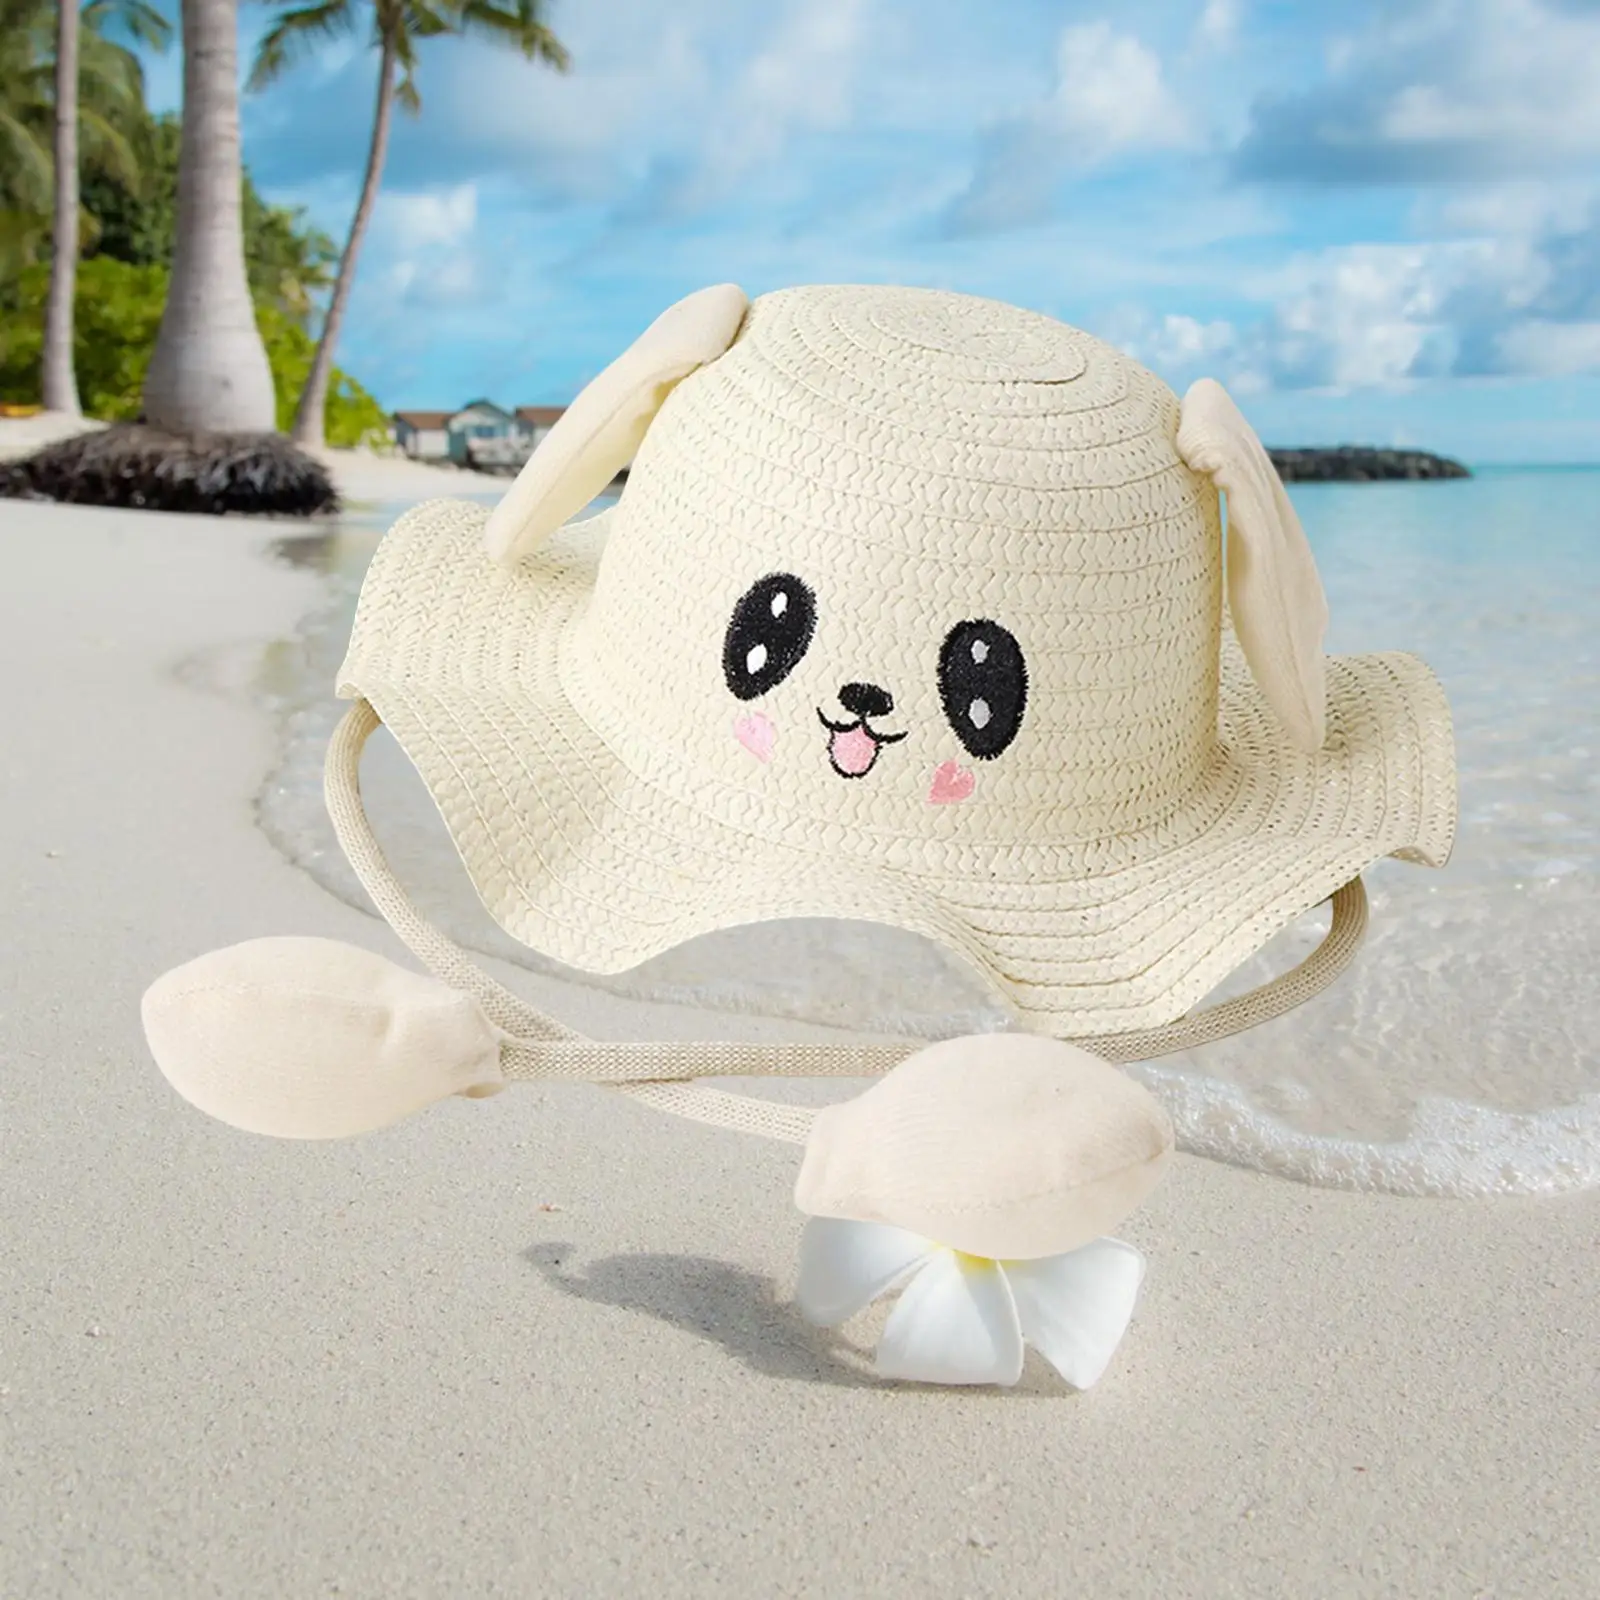  Ear Sunshade Straw Hat Sun Protection Durable Photo Props Beach Hat for Fancy Dress Vocations Travel Festivals Parties